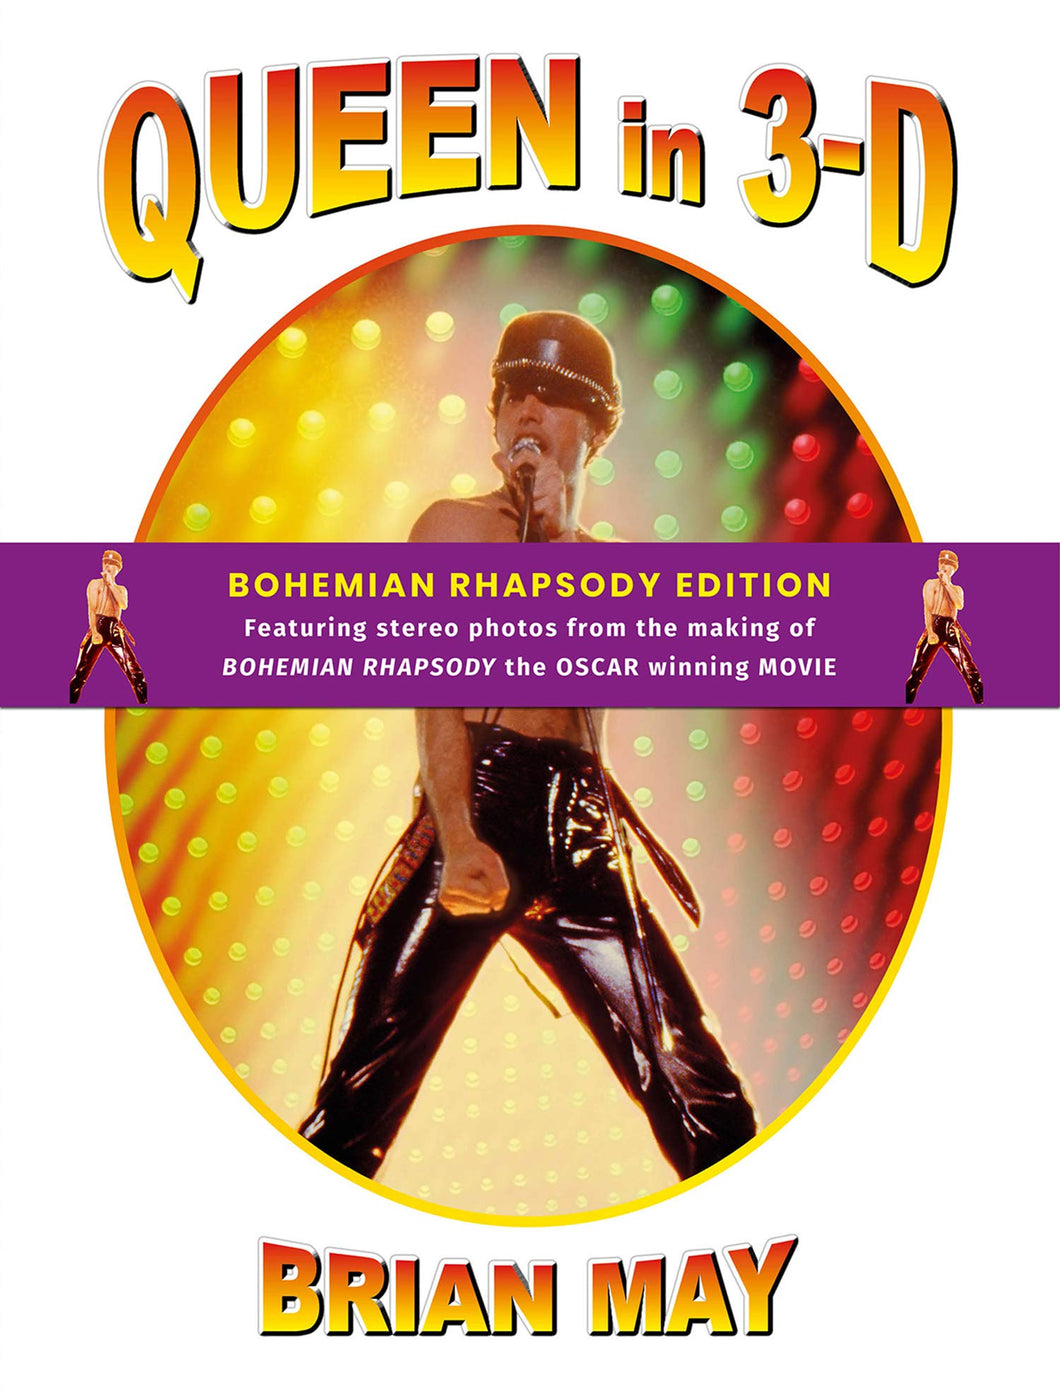 Queen Band Photos Photography Book in 3-D Bohemian Rhapsody Edition by Brian May